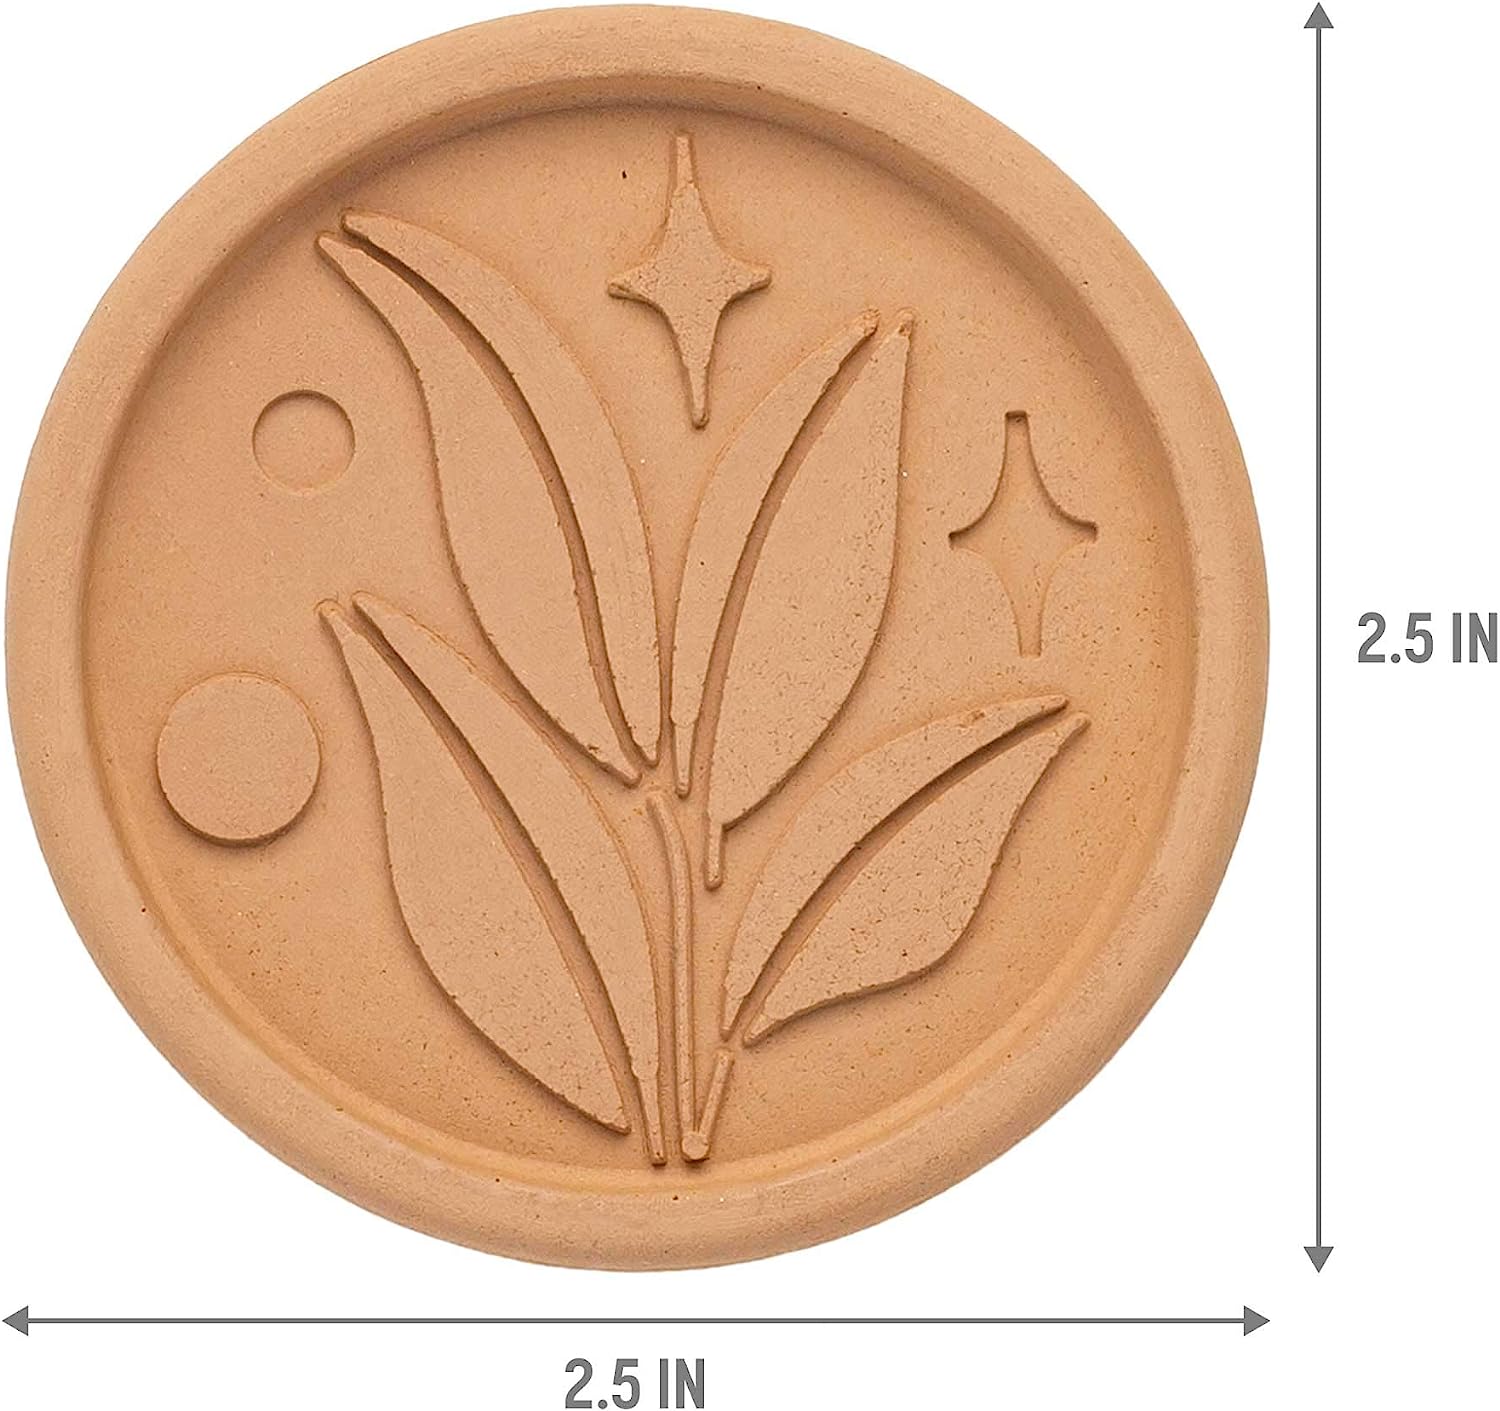 Goodful Brown Sugar Saver and Softener Disc with Elegant Leaf Design, Multiple Uses for Food Storage Containers, Reusable and Food Safe, Terracotta, 2 Pack